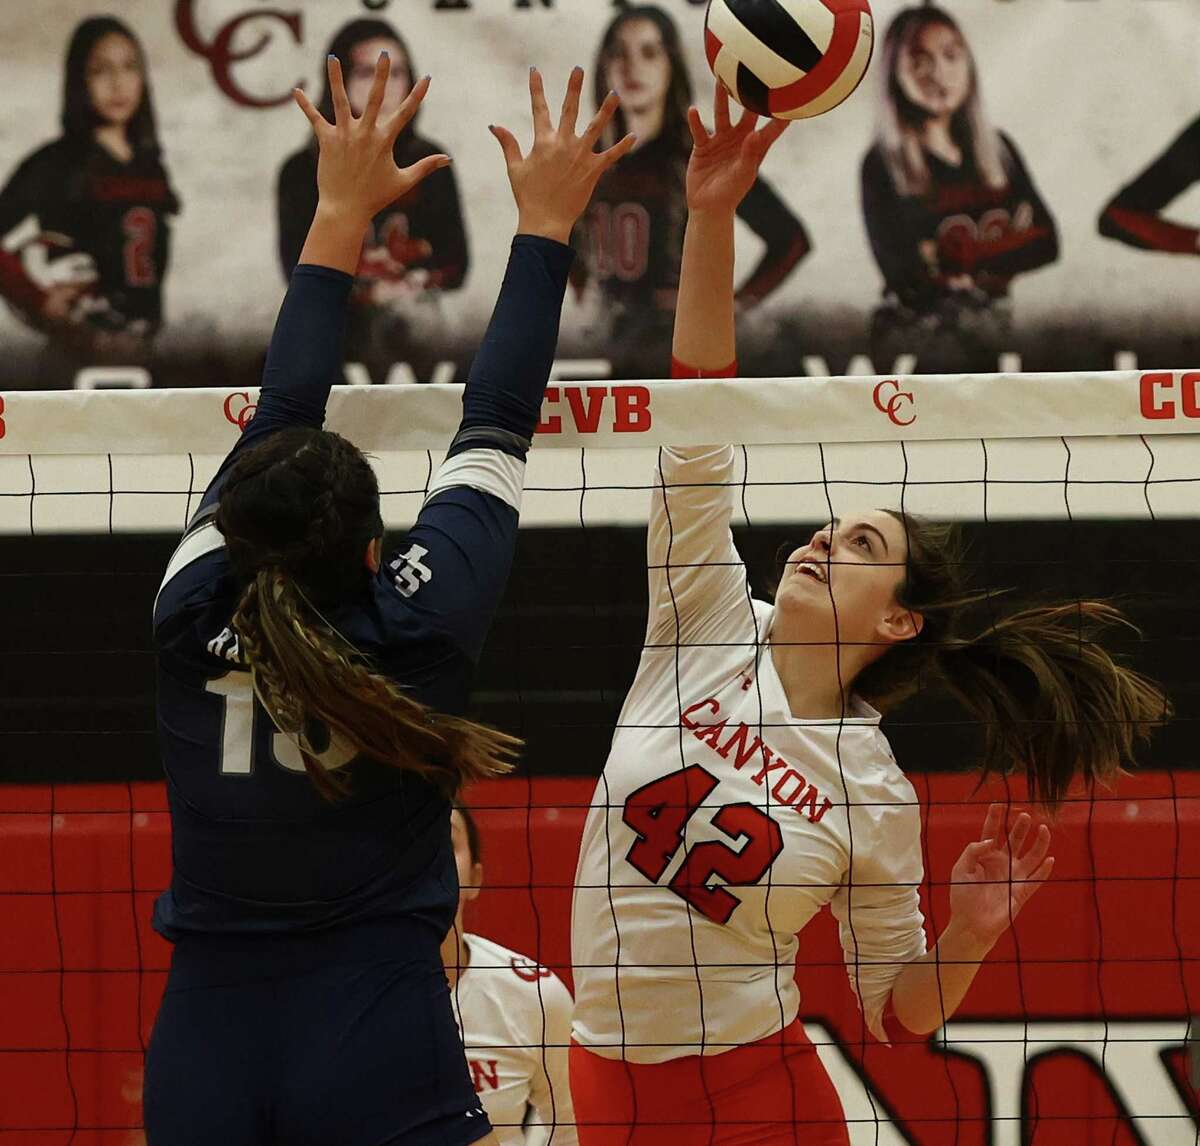 New Braunfels Canyon’s Courtney Pope (42) looks to hit over Smithson Valley’s Megan Zamora (15) during volleyball in New Braunfels on Tuesday, Oct. 18, 2022.